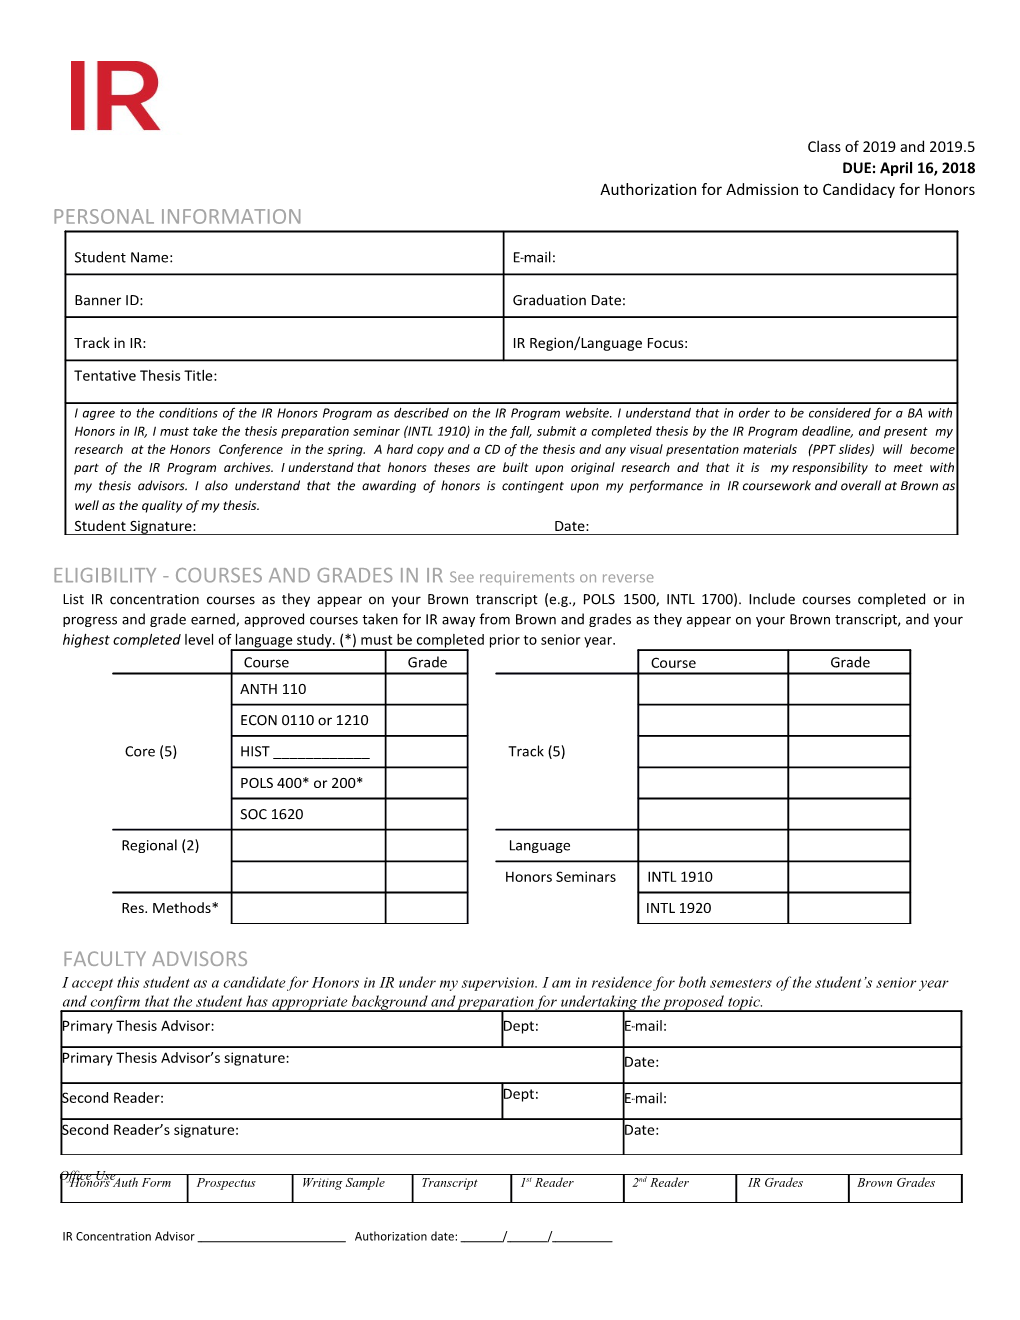 IR Honors Application Form 2014